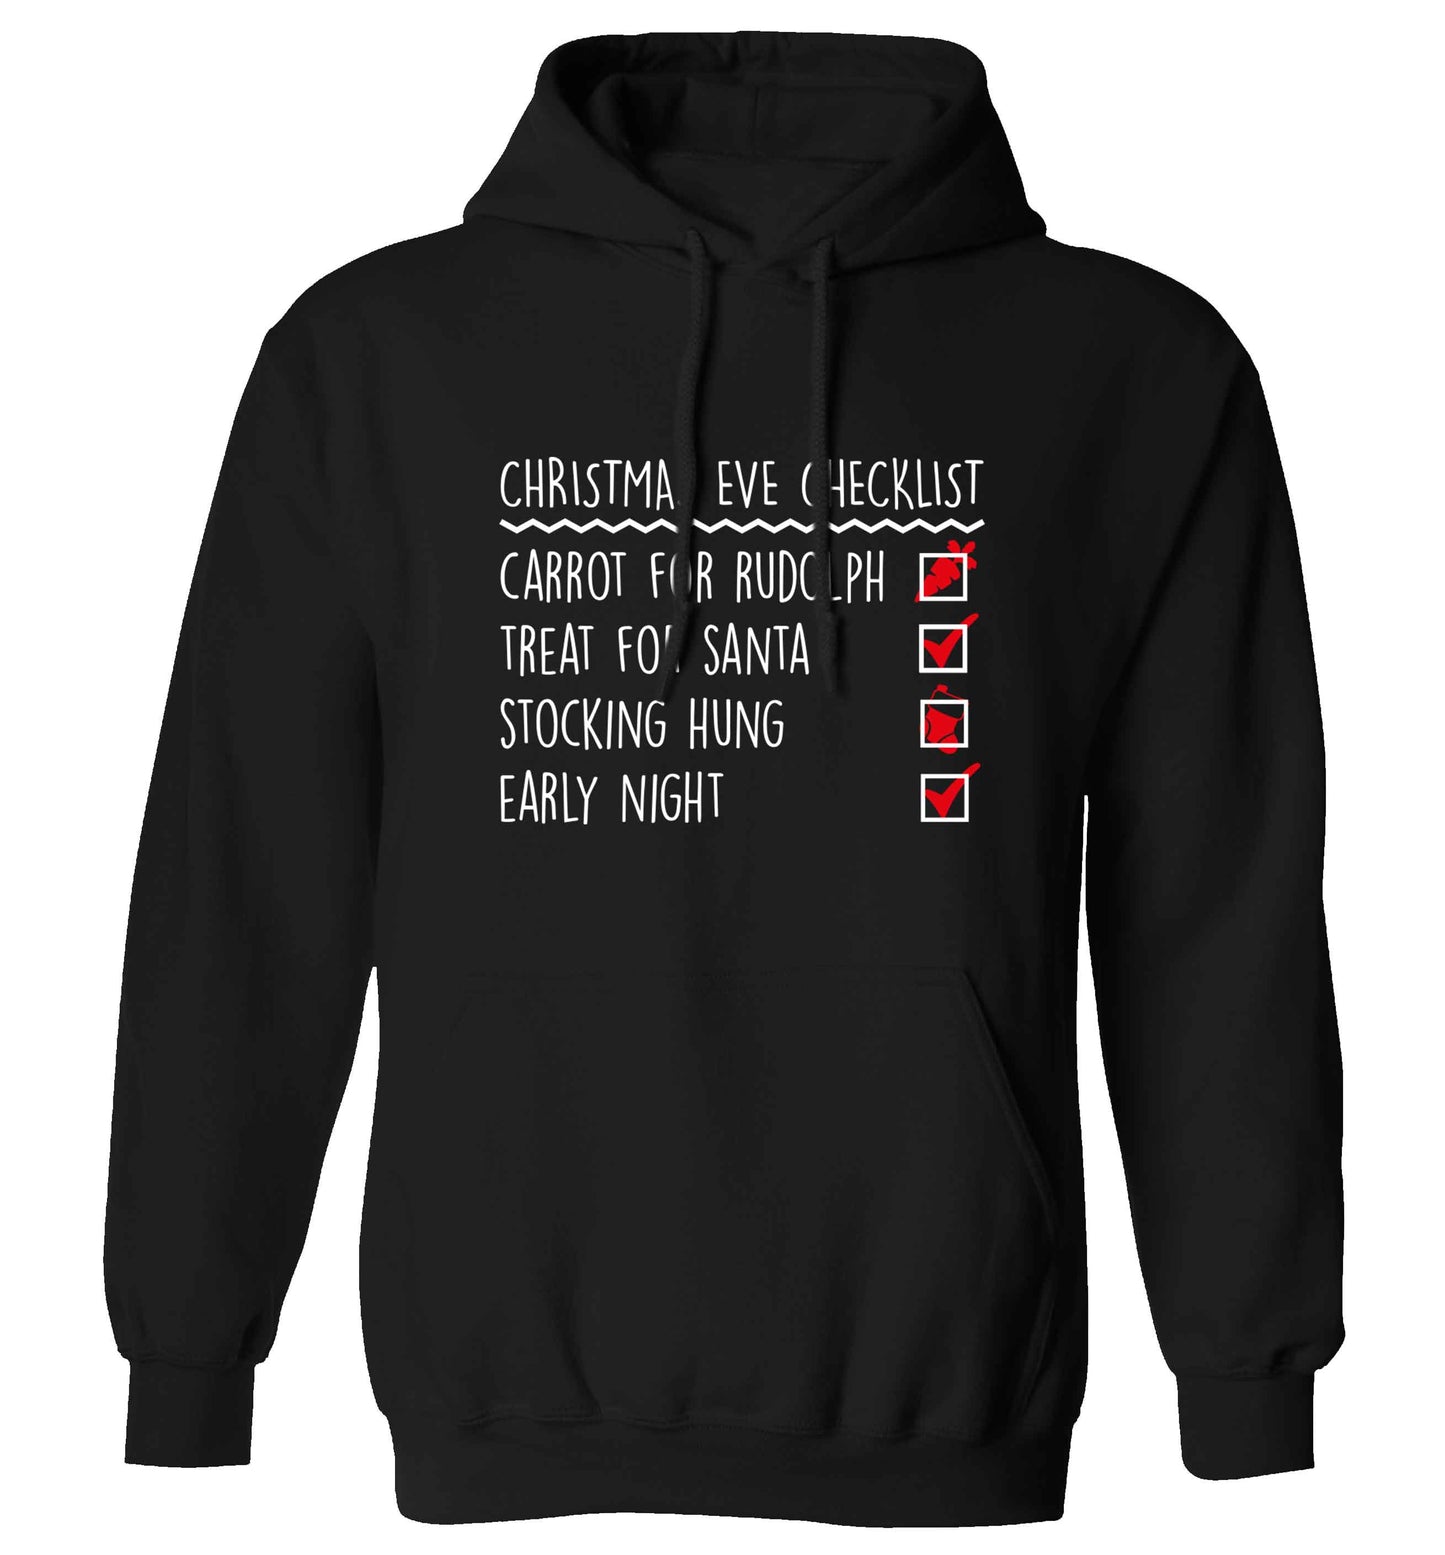 Candy Canes Candy Corns adults unisex black hoodie 2XL